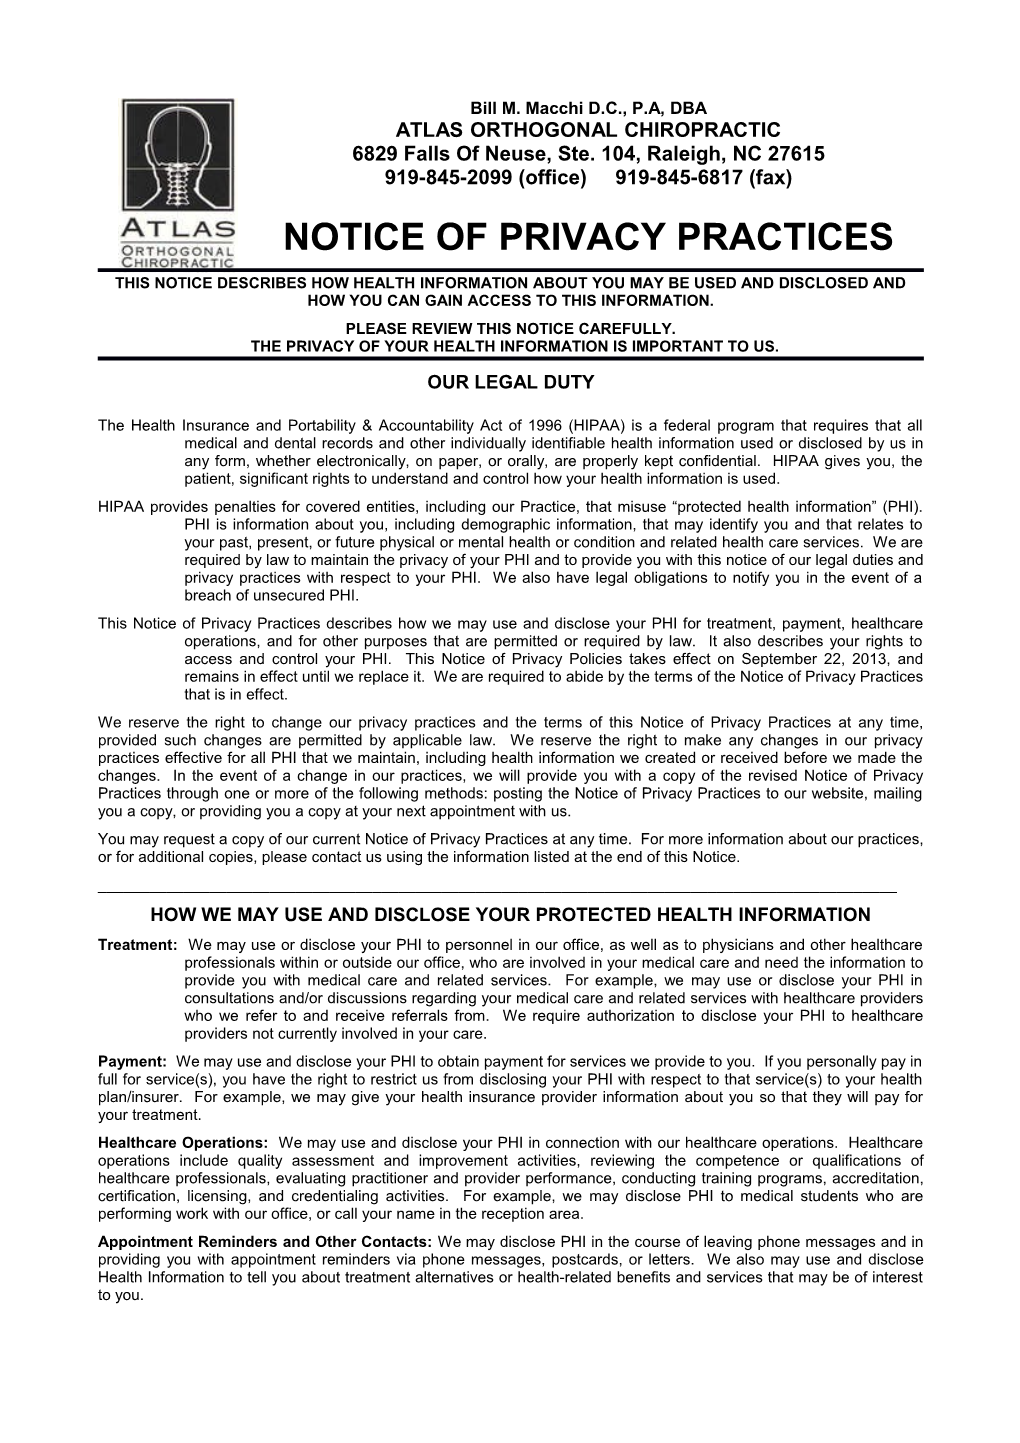 ADA.Org: Notice of Privacy Practices